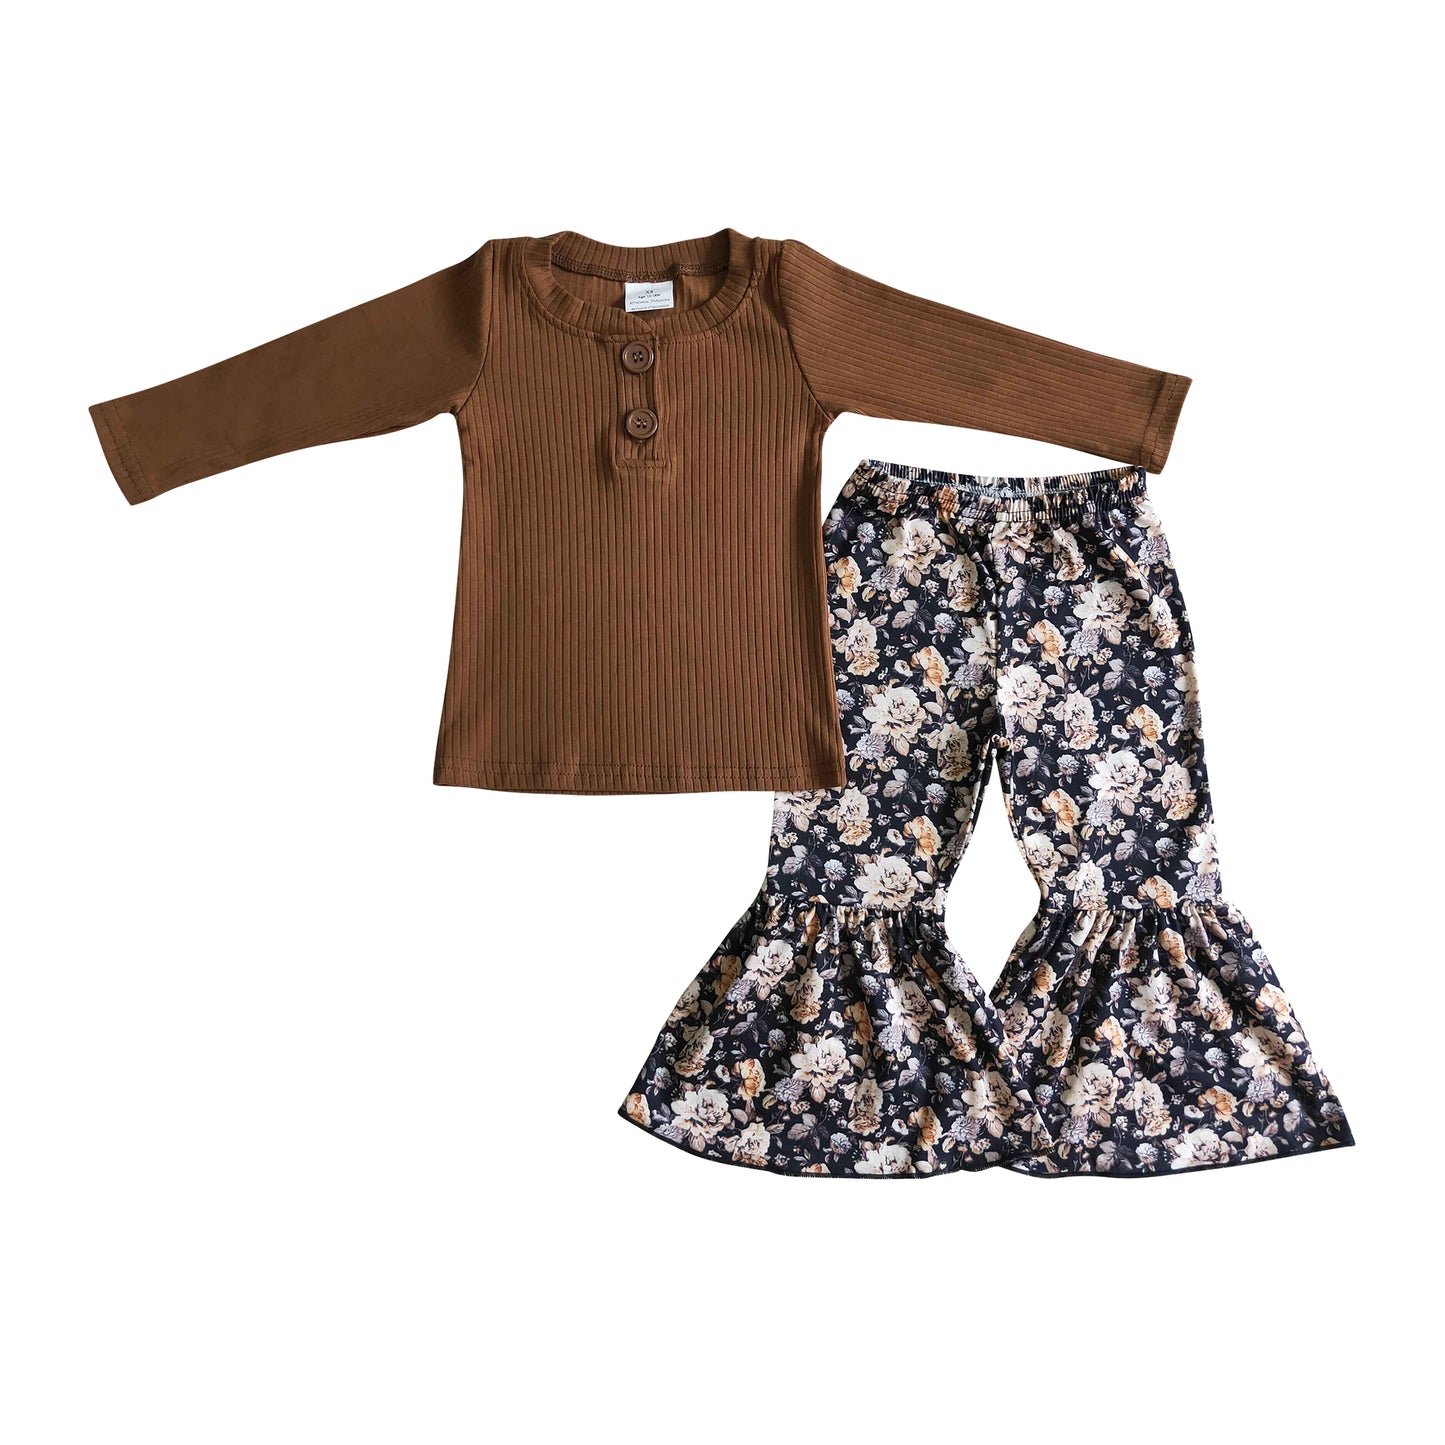 kids clothing brown cotton shirt floral pants set outfit girl